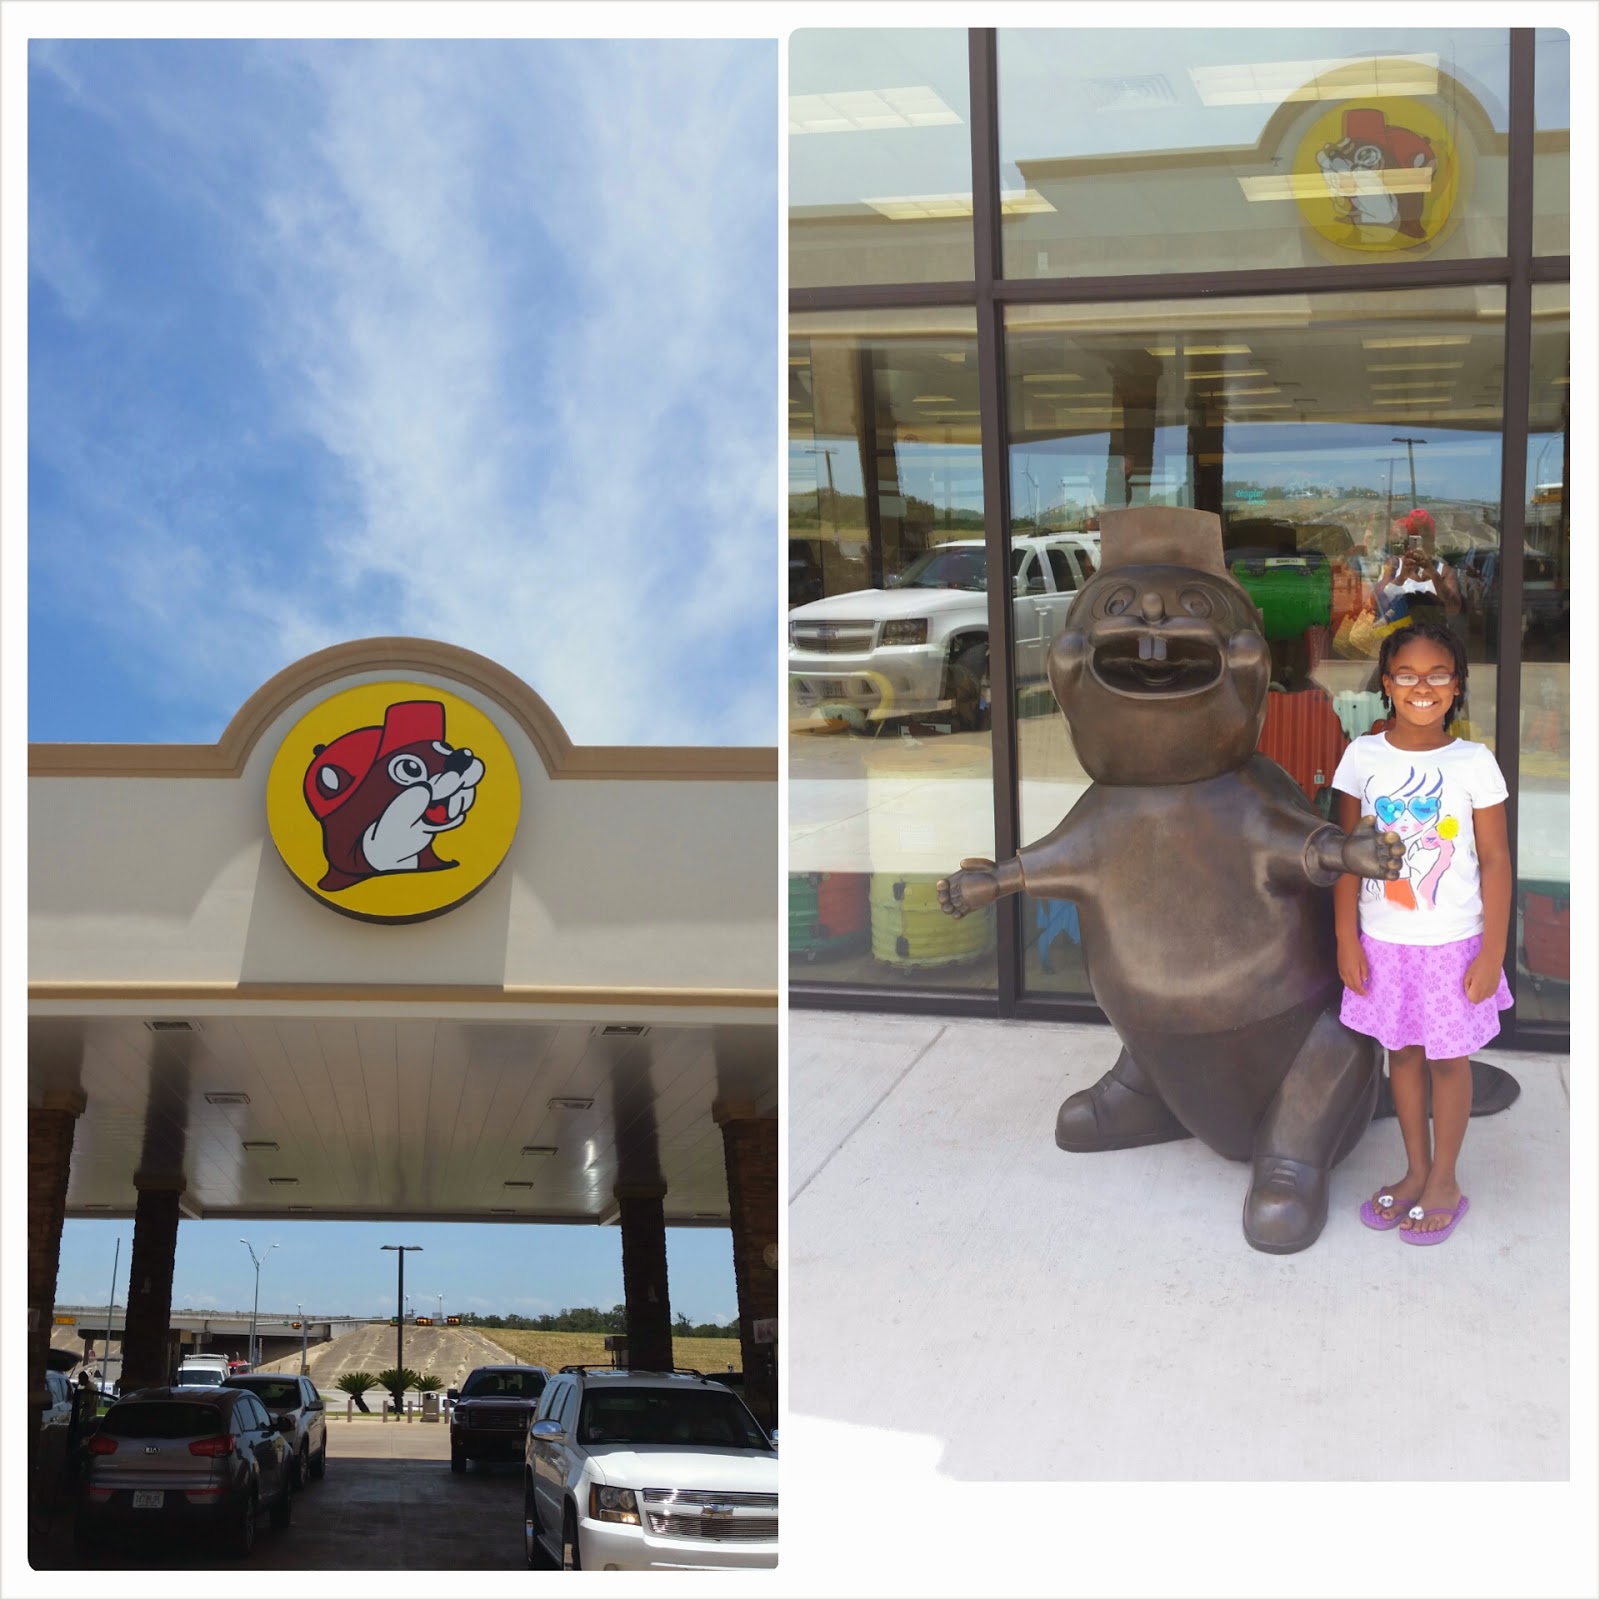 My Epic Family Road Trip Vacation! #RoadTrip #bucees via ProductReviewMom.com